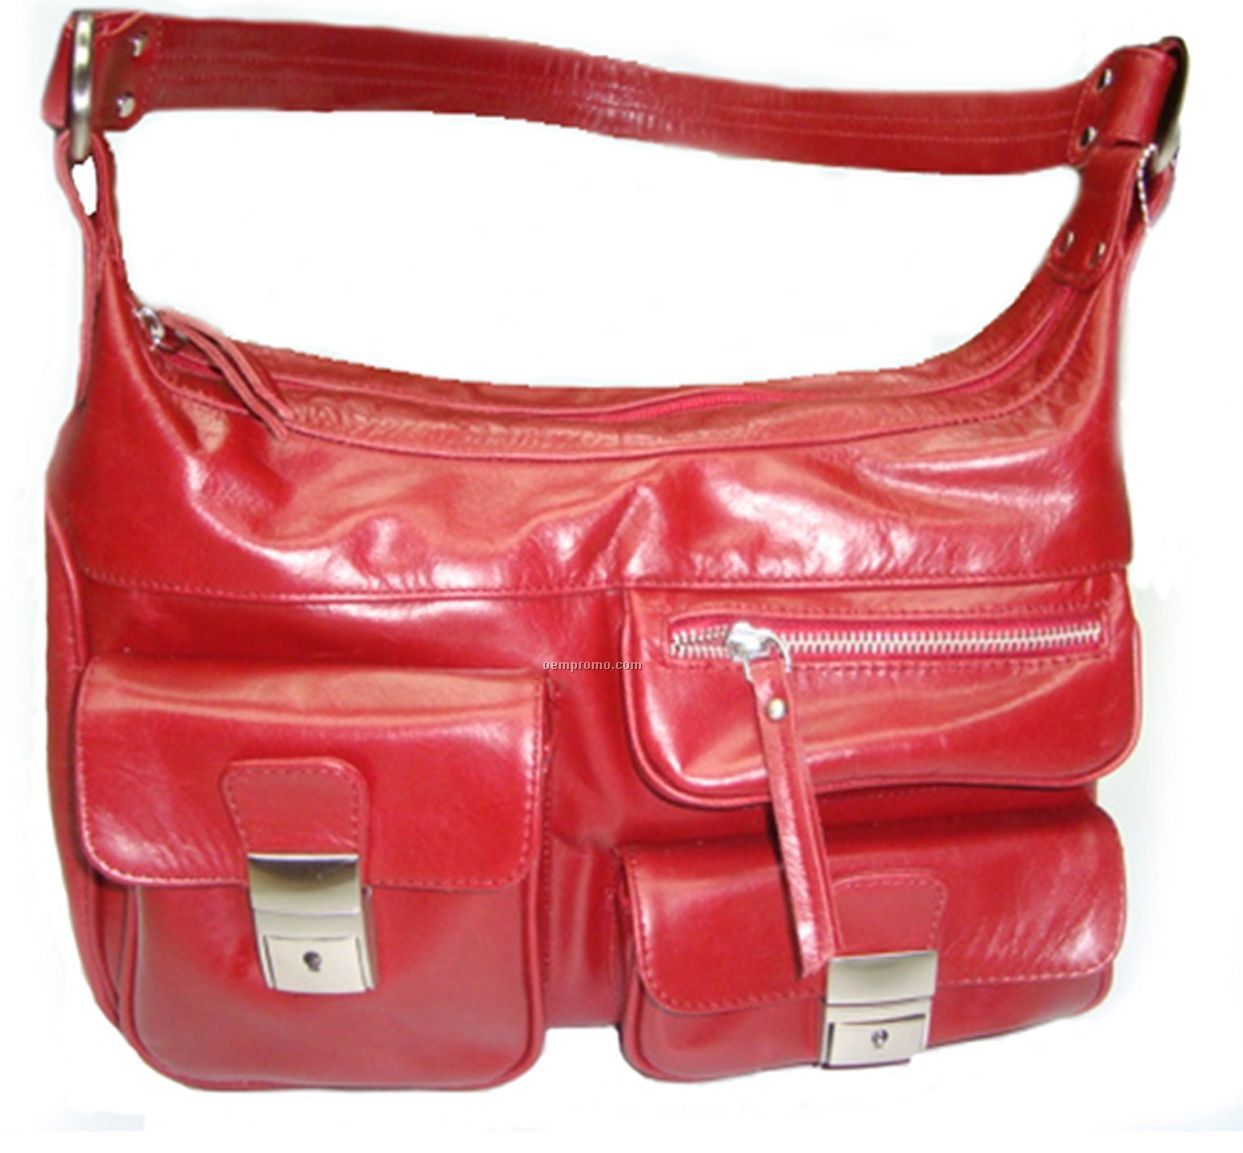 Red Purse W/ 3 Front Pockets